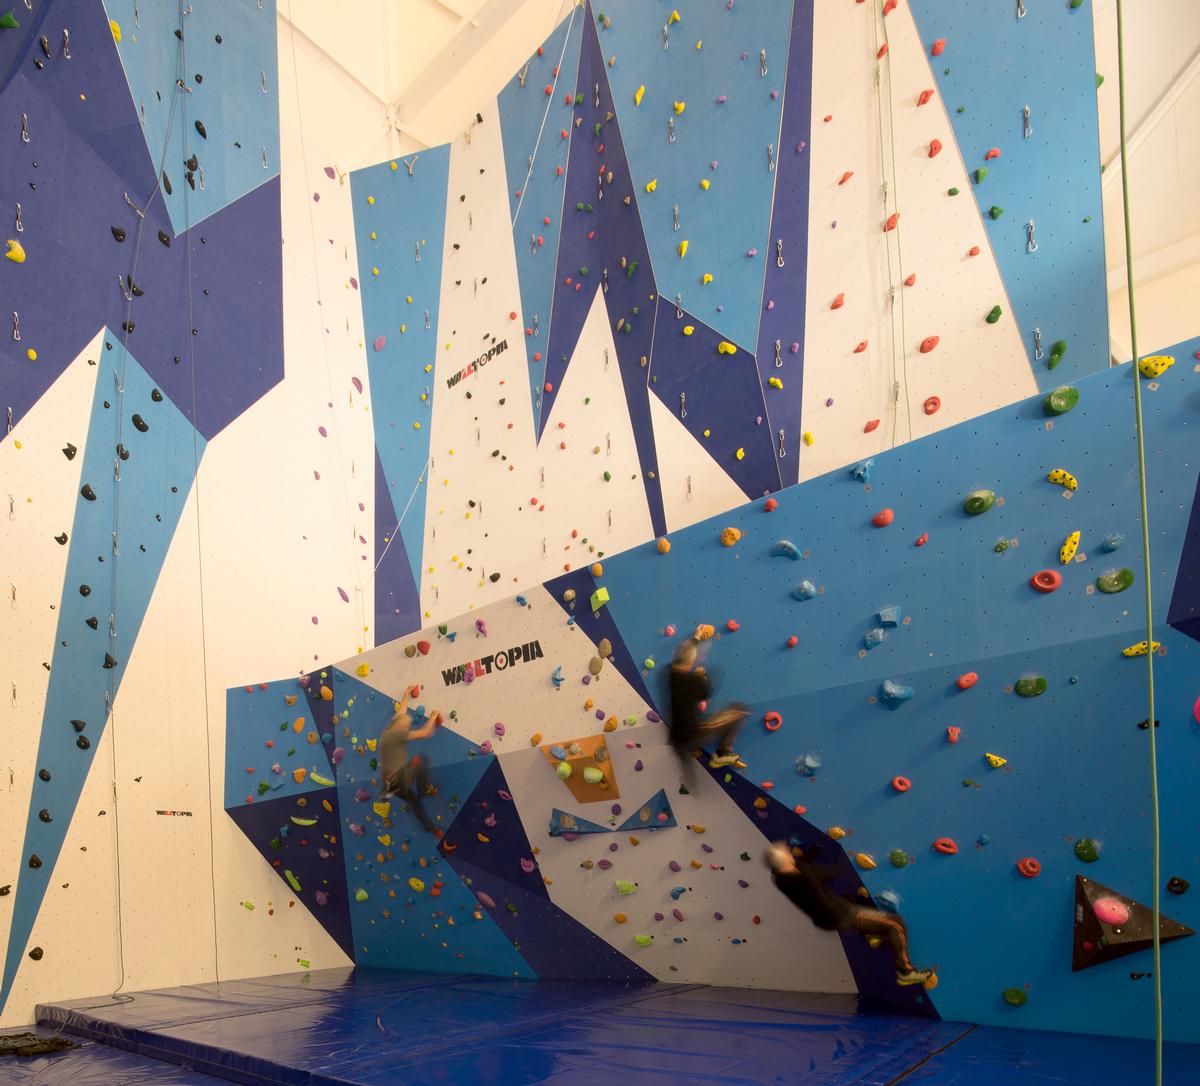 A huge climbing wall is one of the attractions offered in the centre / Soren Harder 